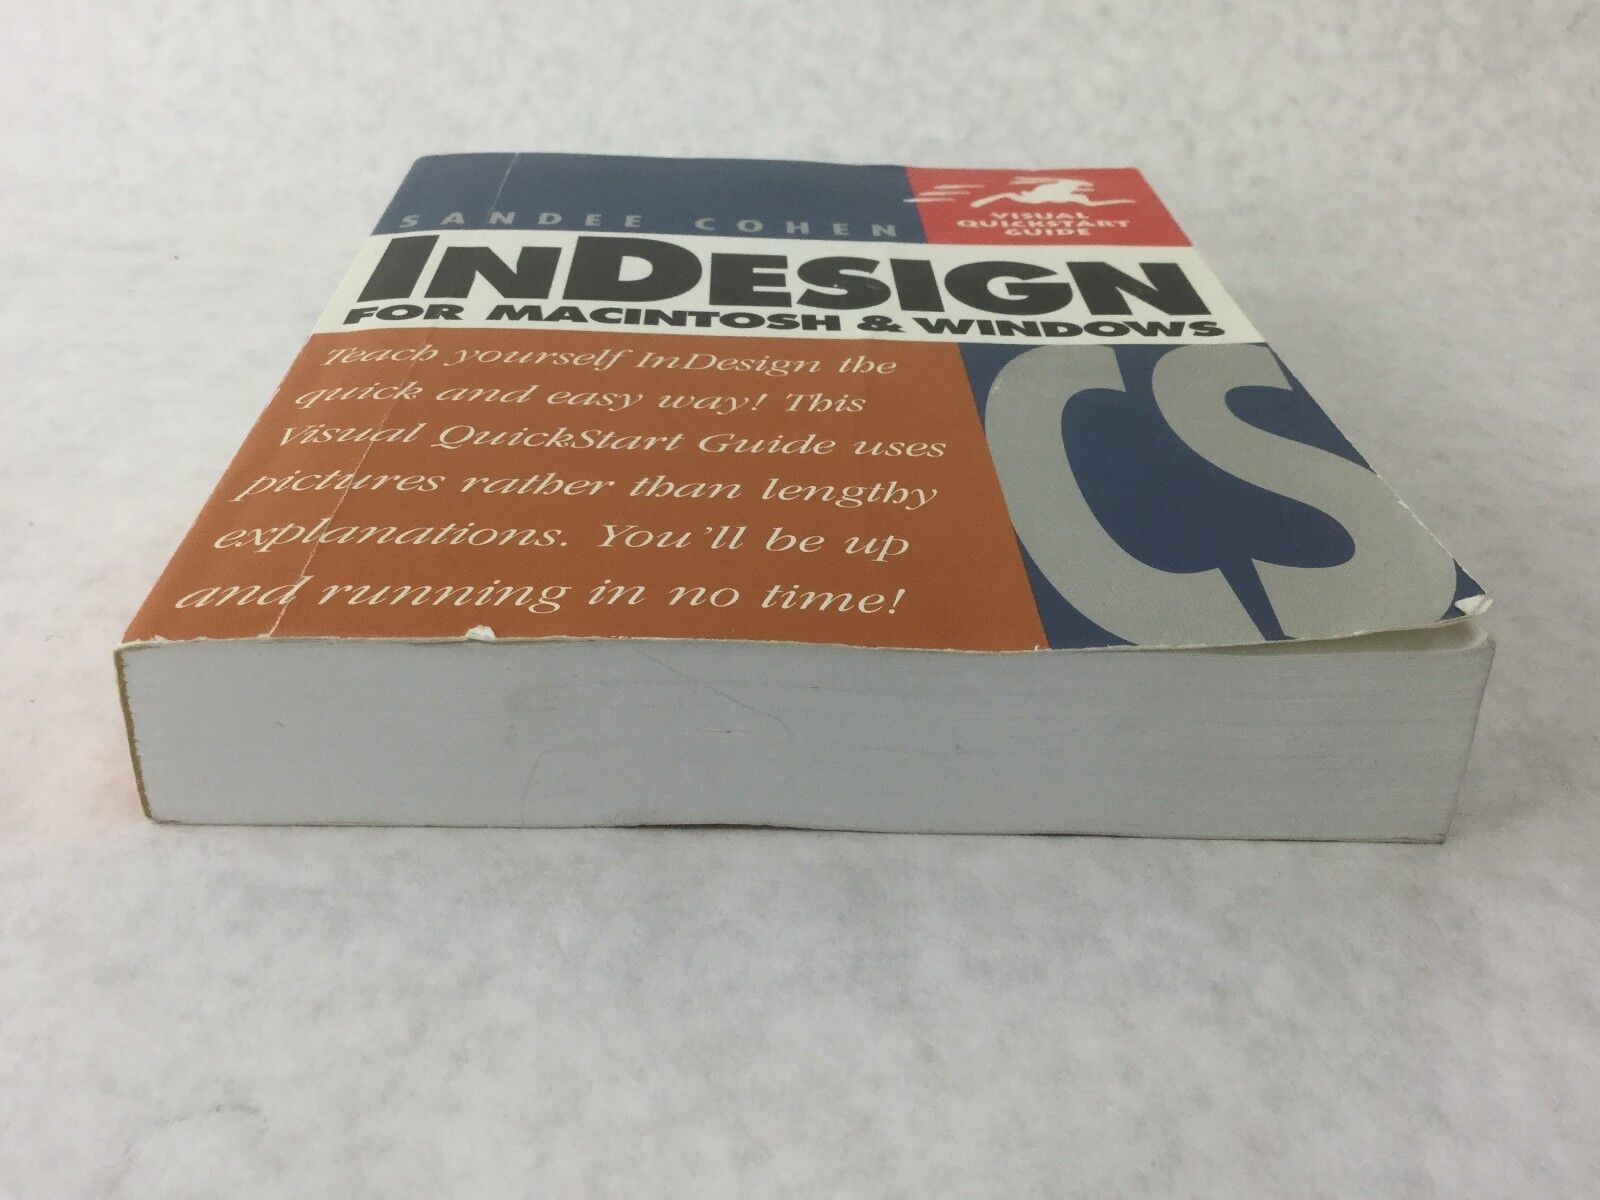 INDESIGN CS FOR MACINTOSH AND WINDOWS By Sandee Cohen